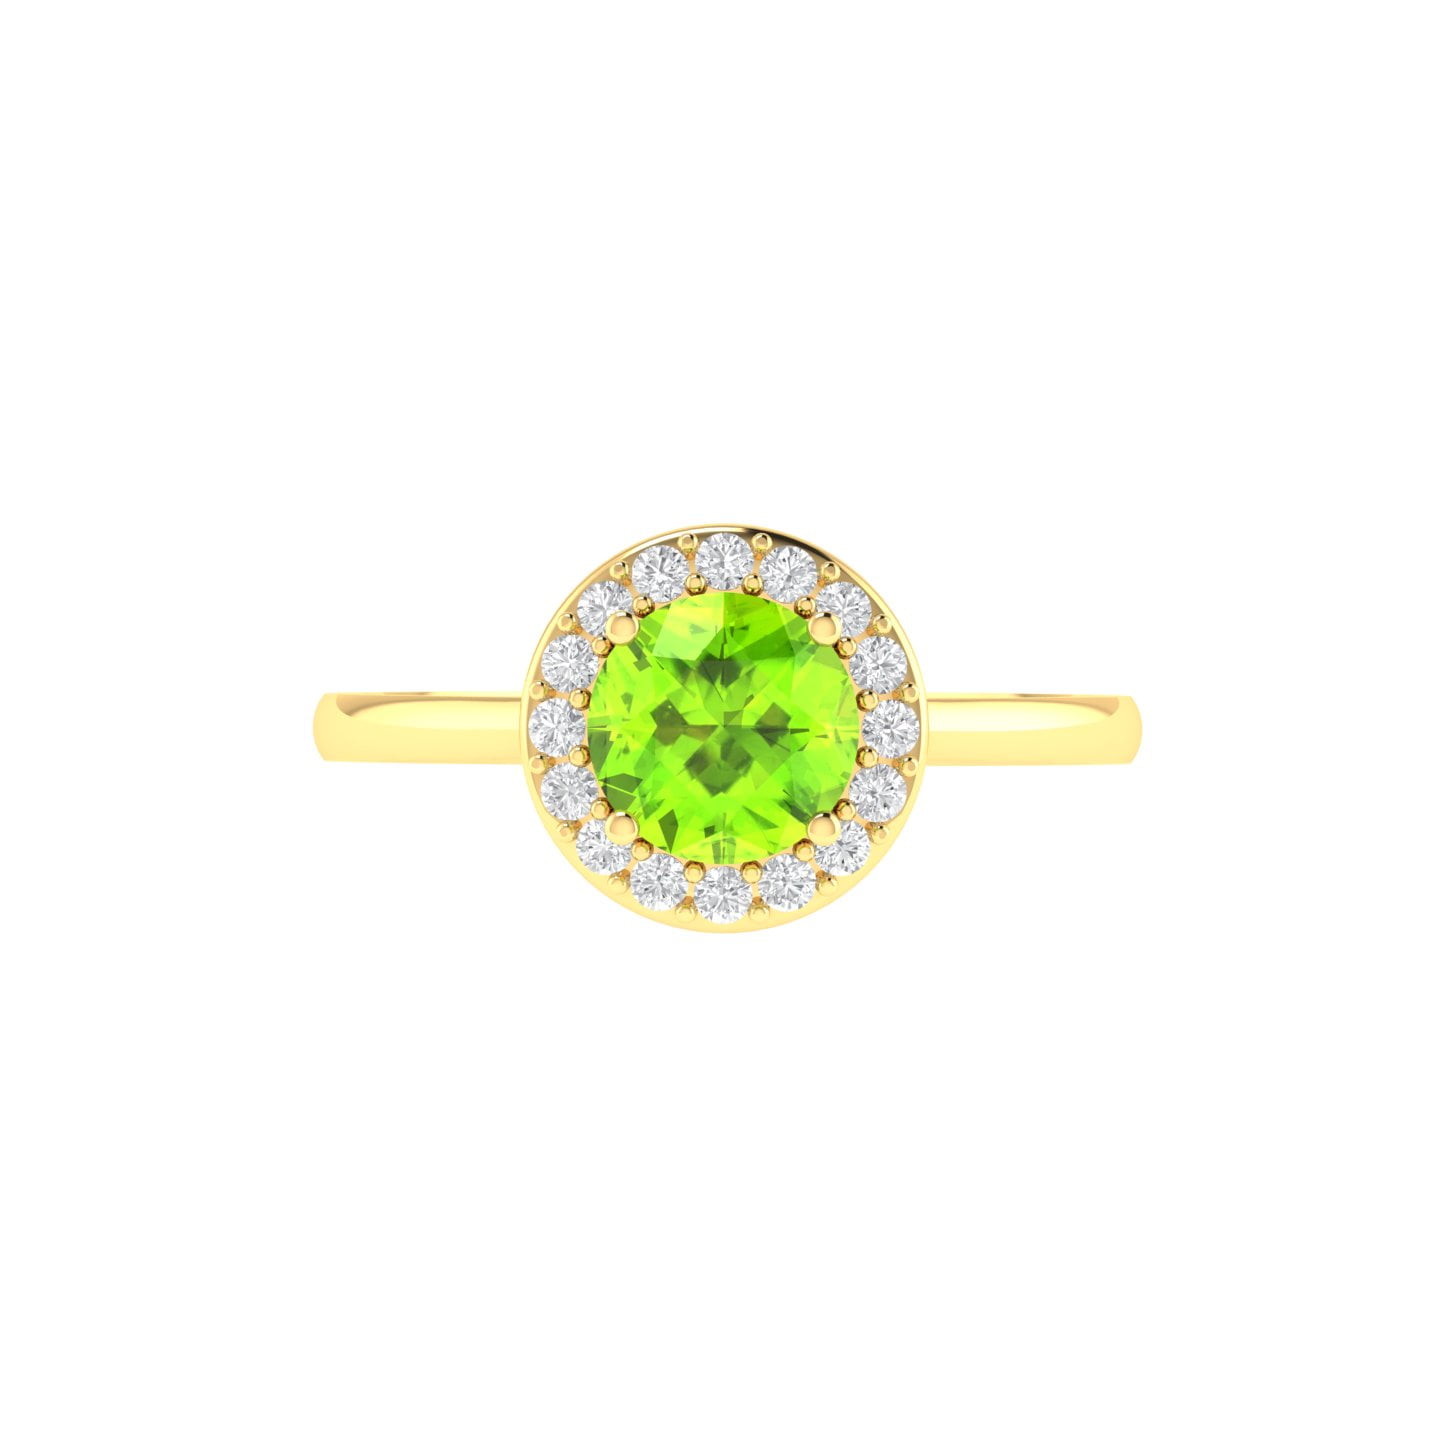 Diana Round Peridot and Glowing Diamond Ring in 18K Gold (0.5ct)